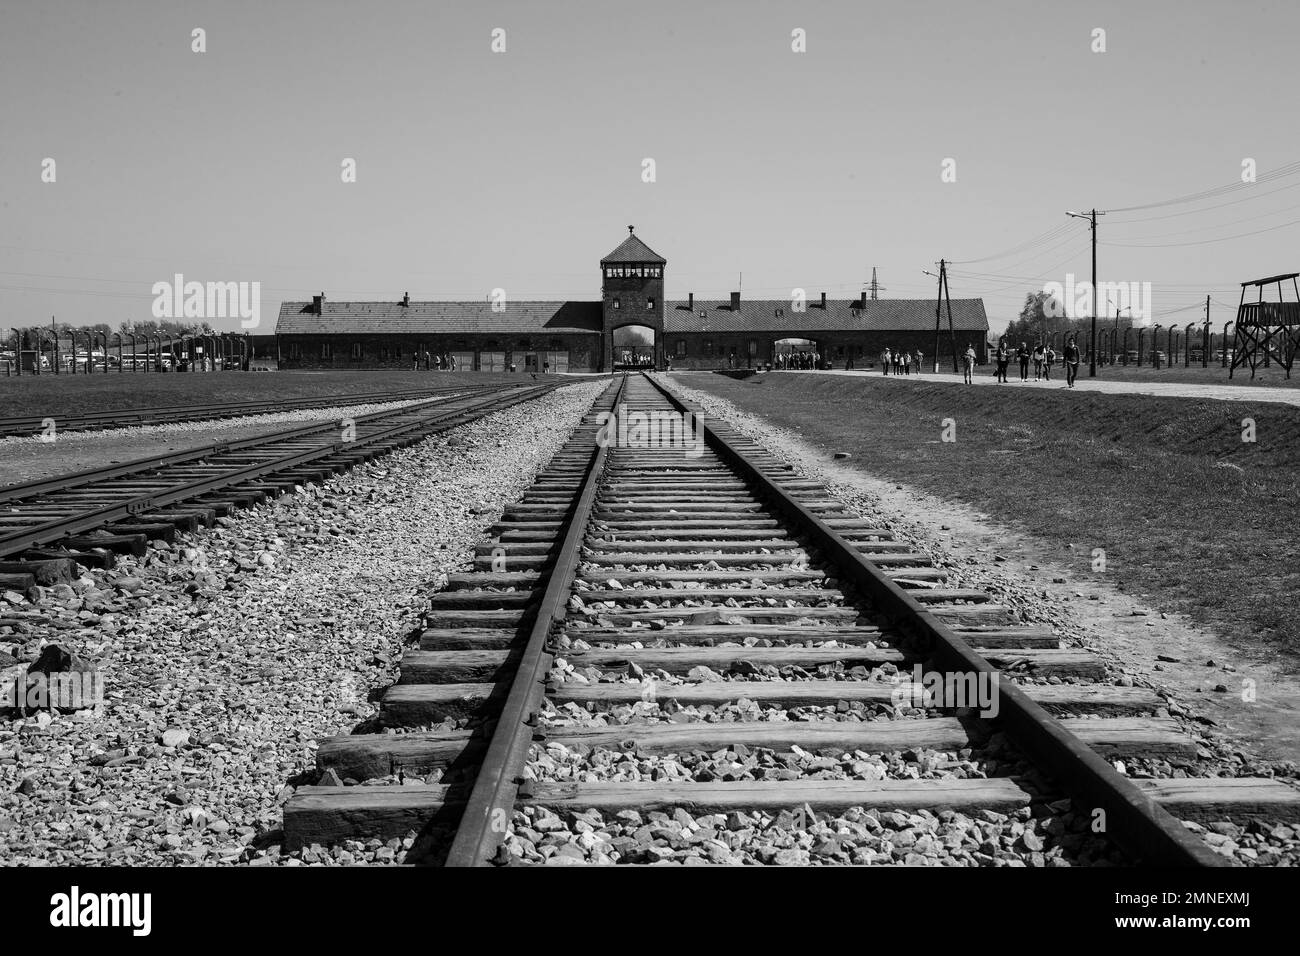 Looking along railway lines to the Birkenau concentration camp at Auschwitz, scene of the World War 2 holocaust genocide atrocities Stock Photo